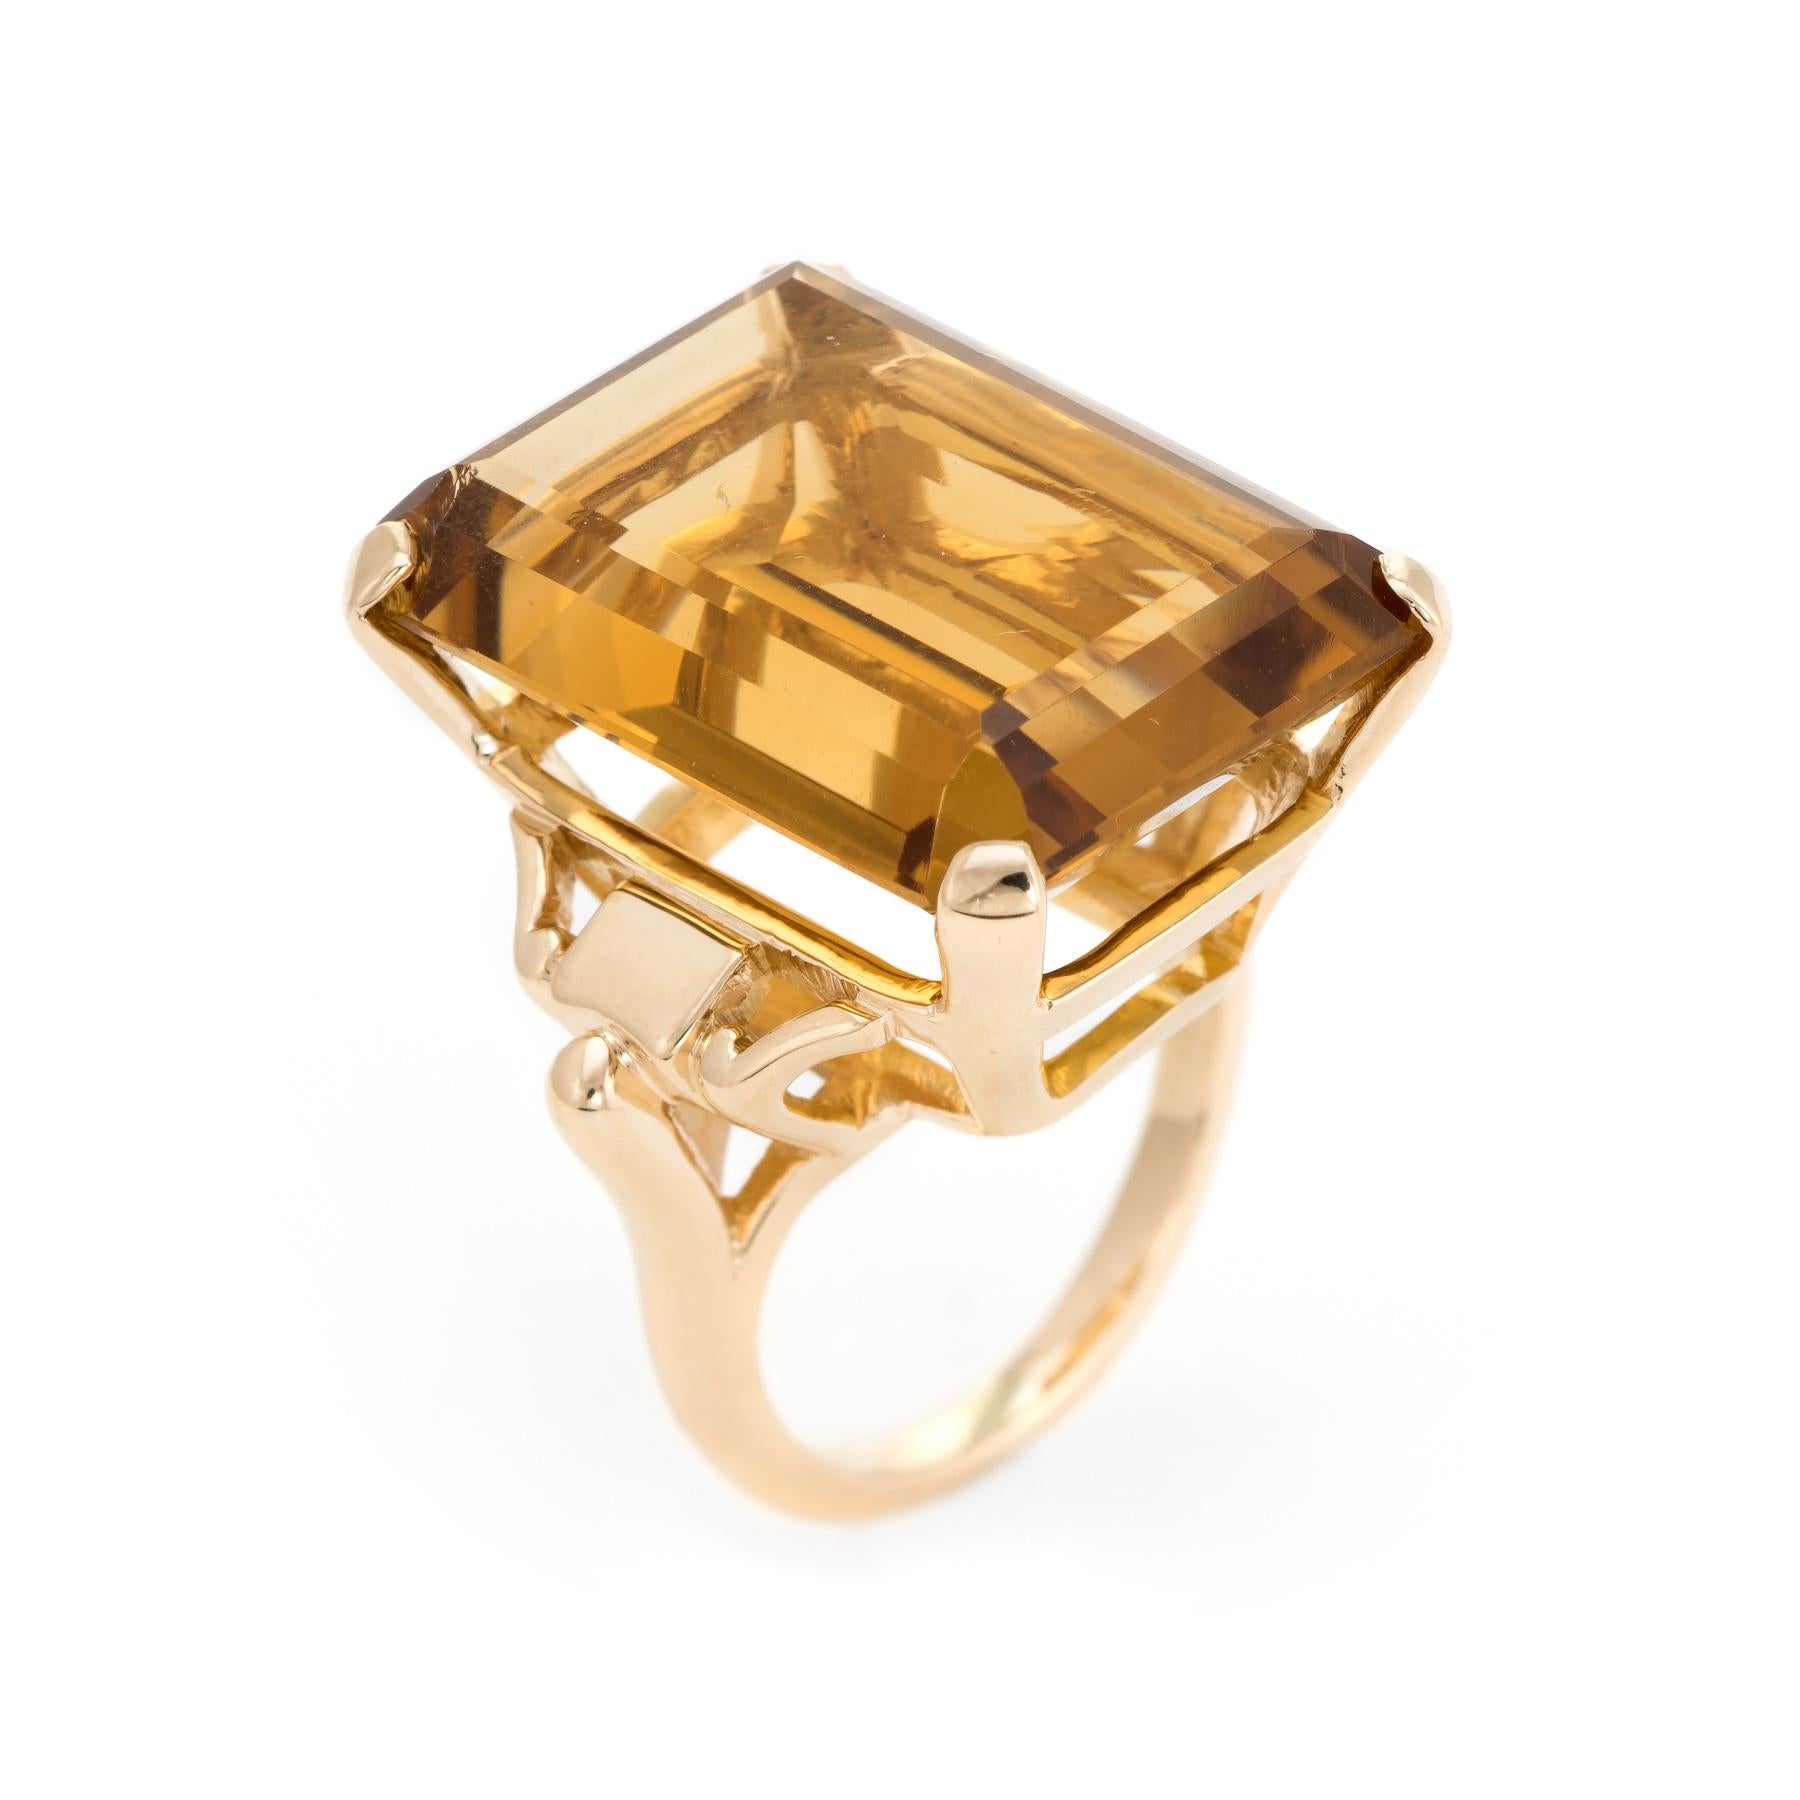 Finely detailed vintage citrine cocktail ring (circa 1950s to 1960s), crafted in 14 karat yellow gold. 

Emerald cut citrine measures 22mm x 16mm (estimated at 40 carats) is set into the mount. The citrine is in excellent condition and free of